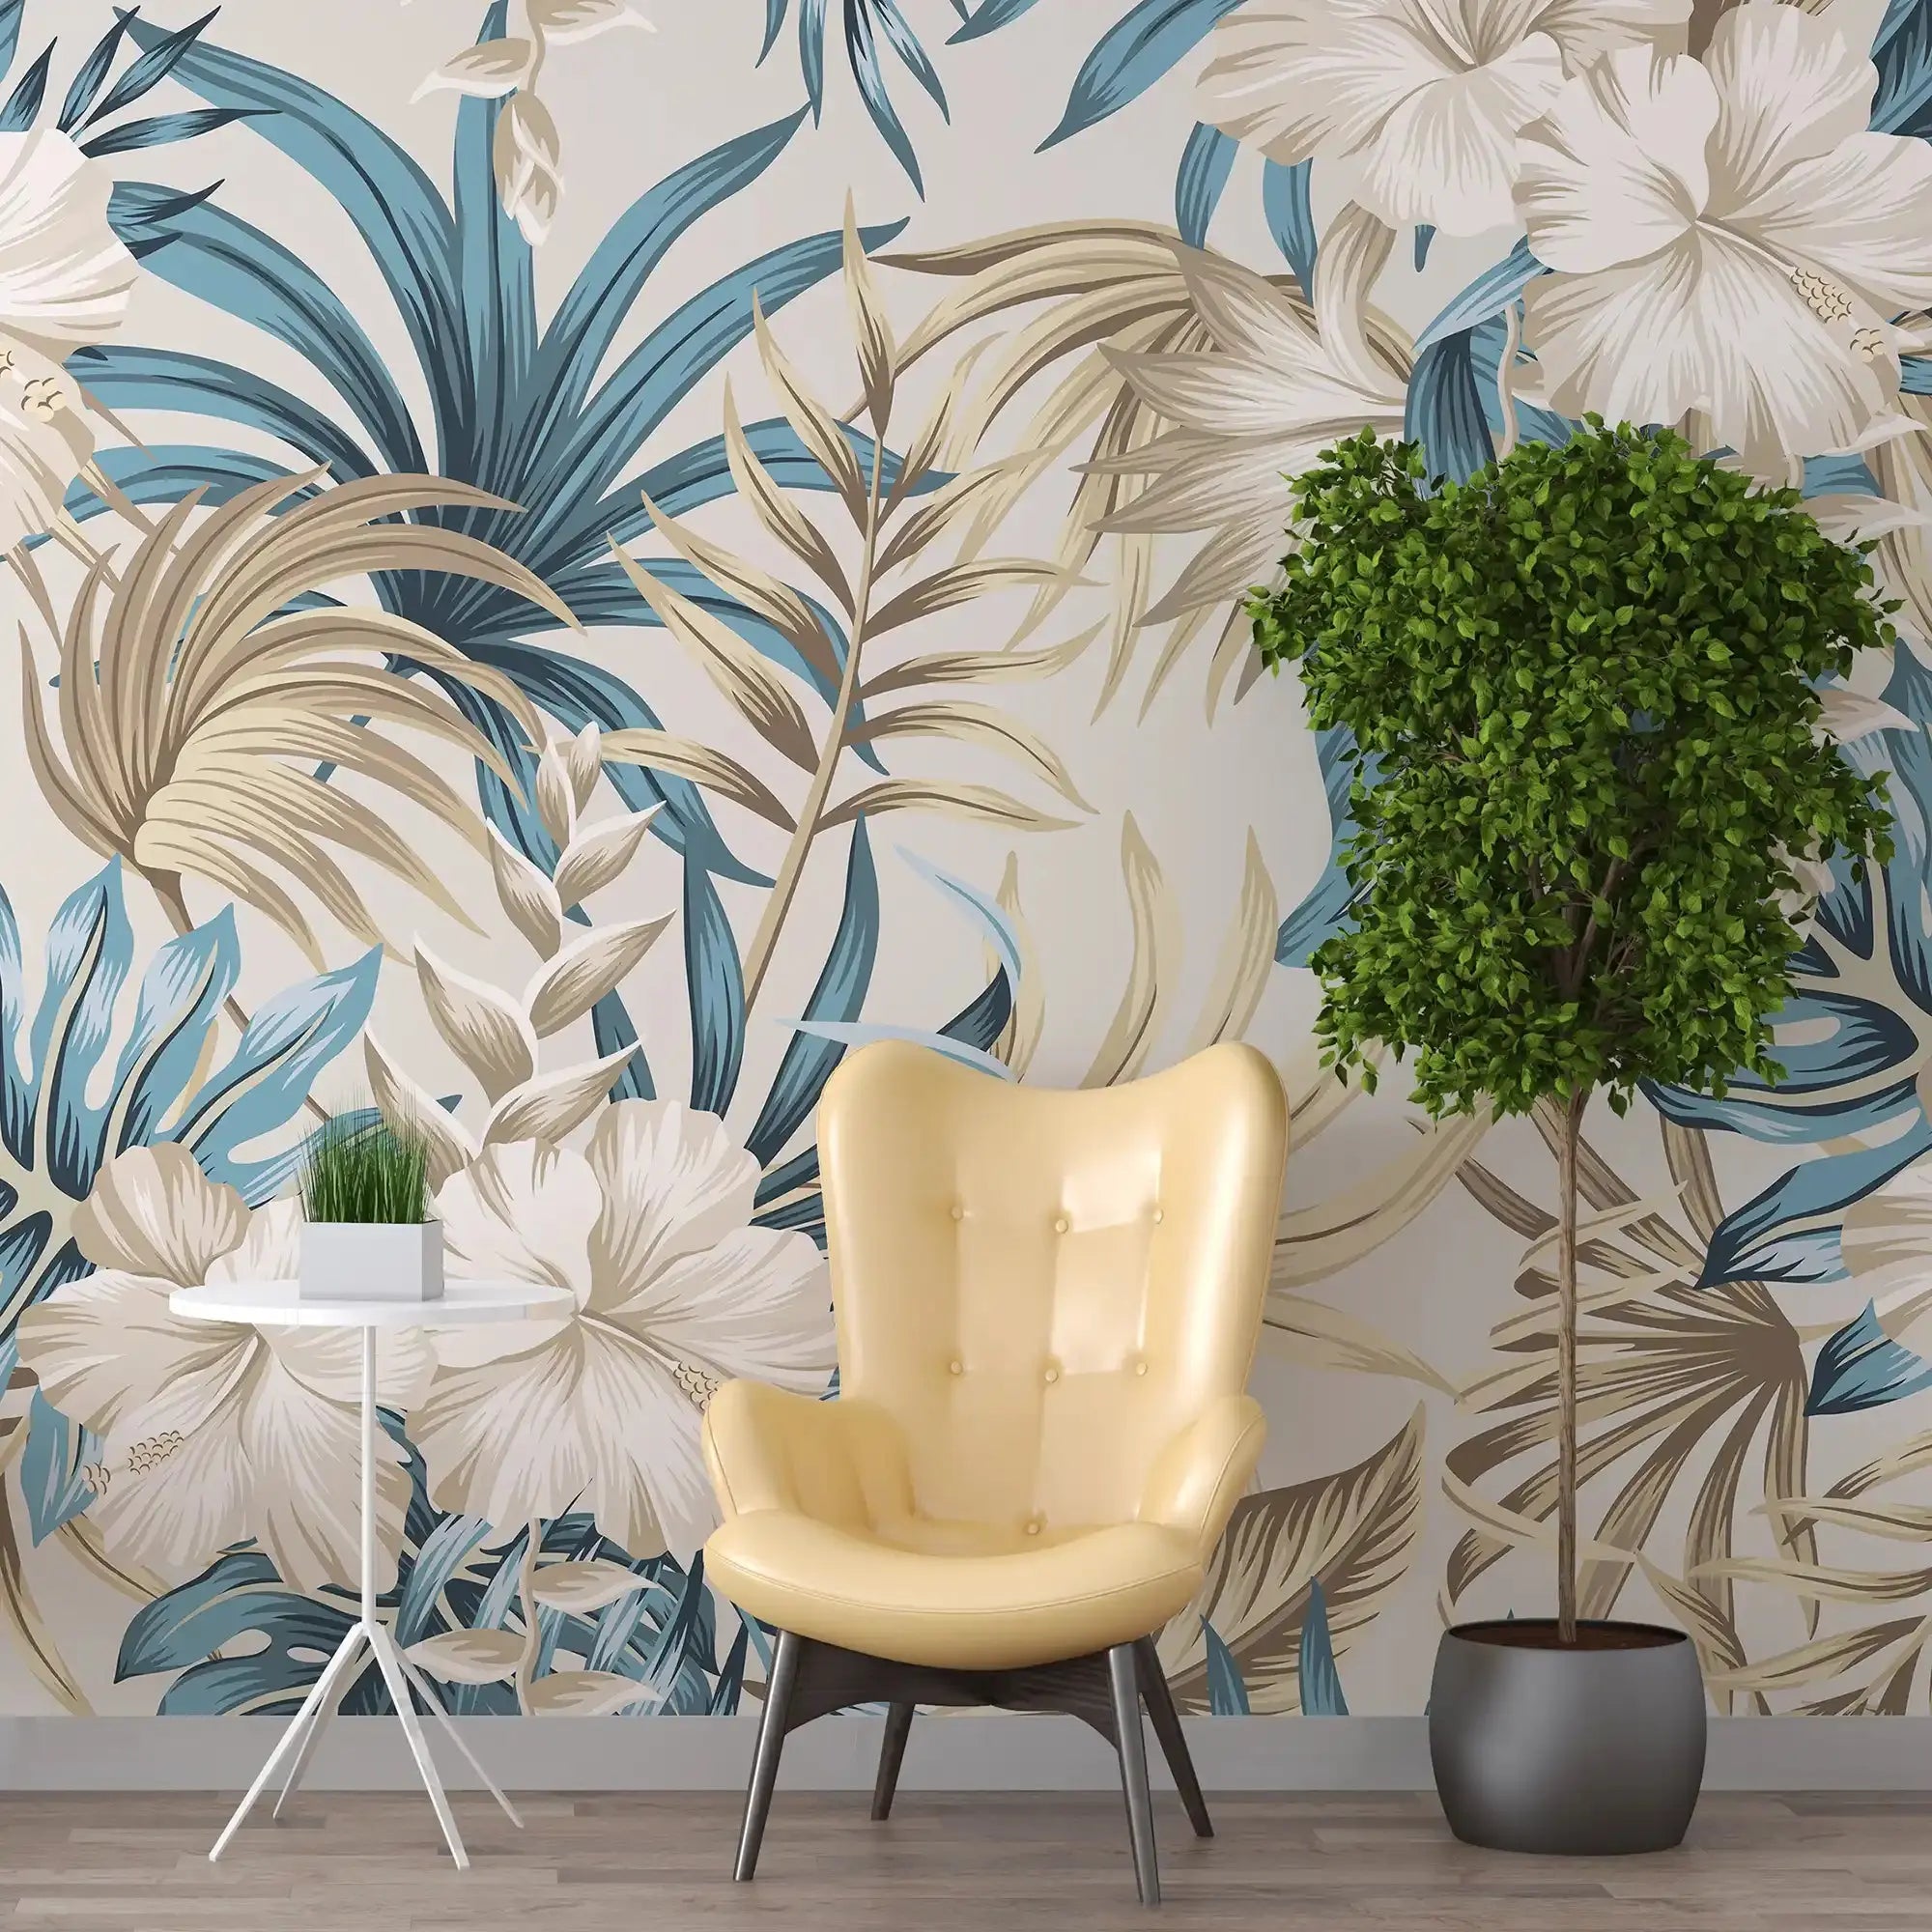 3099-B / Contemporary Floral Peel and Stick Wallpaper, Trendy Tropical Pattern, Adhesive Wall Paper, Easy Installation for Kitchen, Bedroom, Bathroom - Artevella